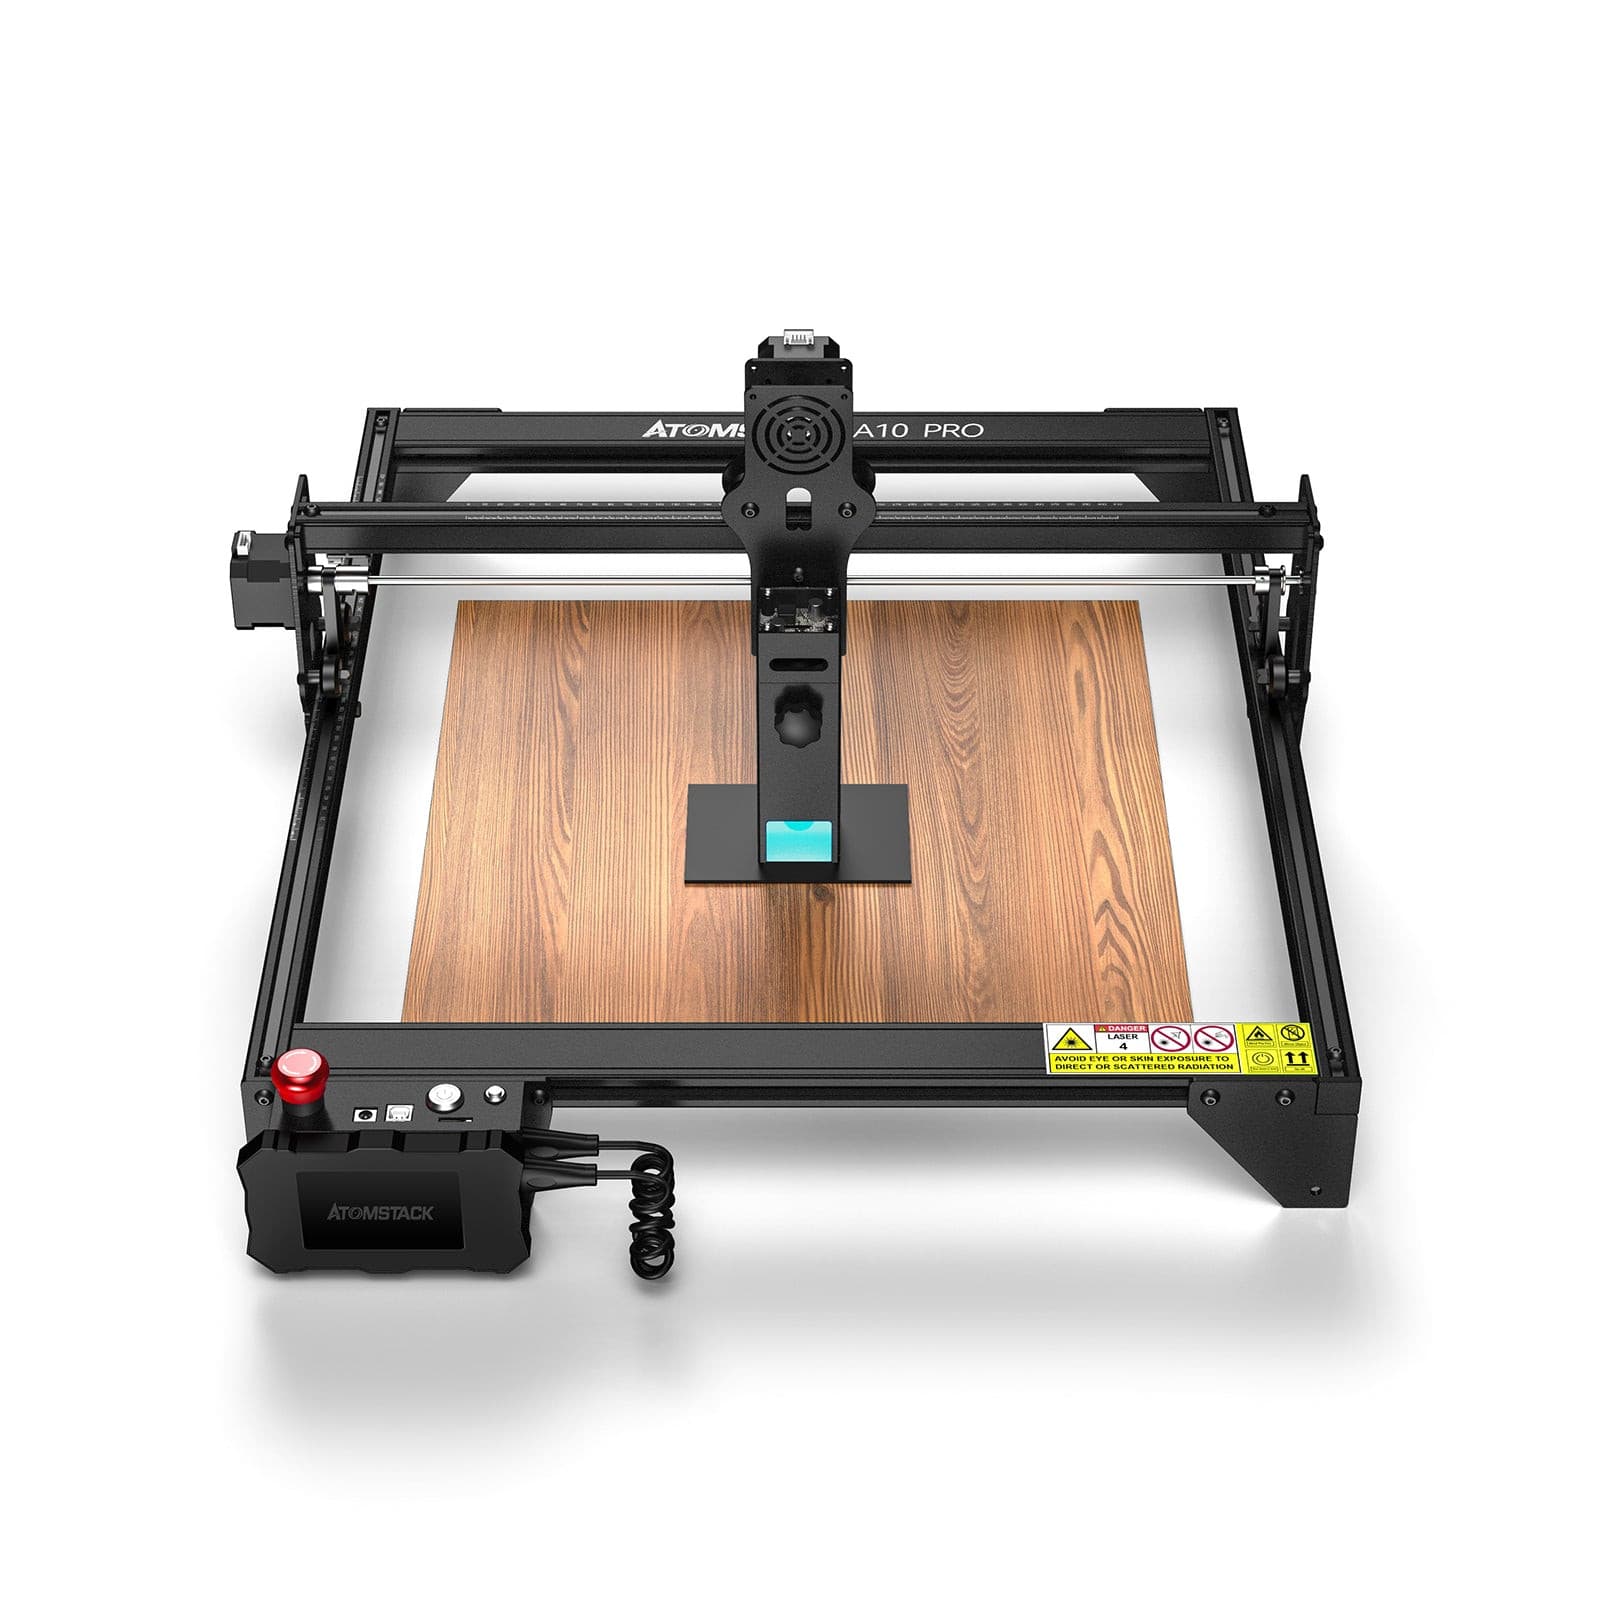 Atomstack A5 pro Laser Engraver - guide, settings, review, upgrade